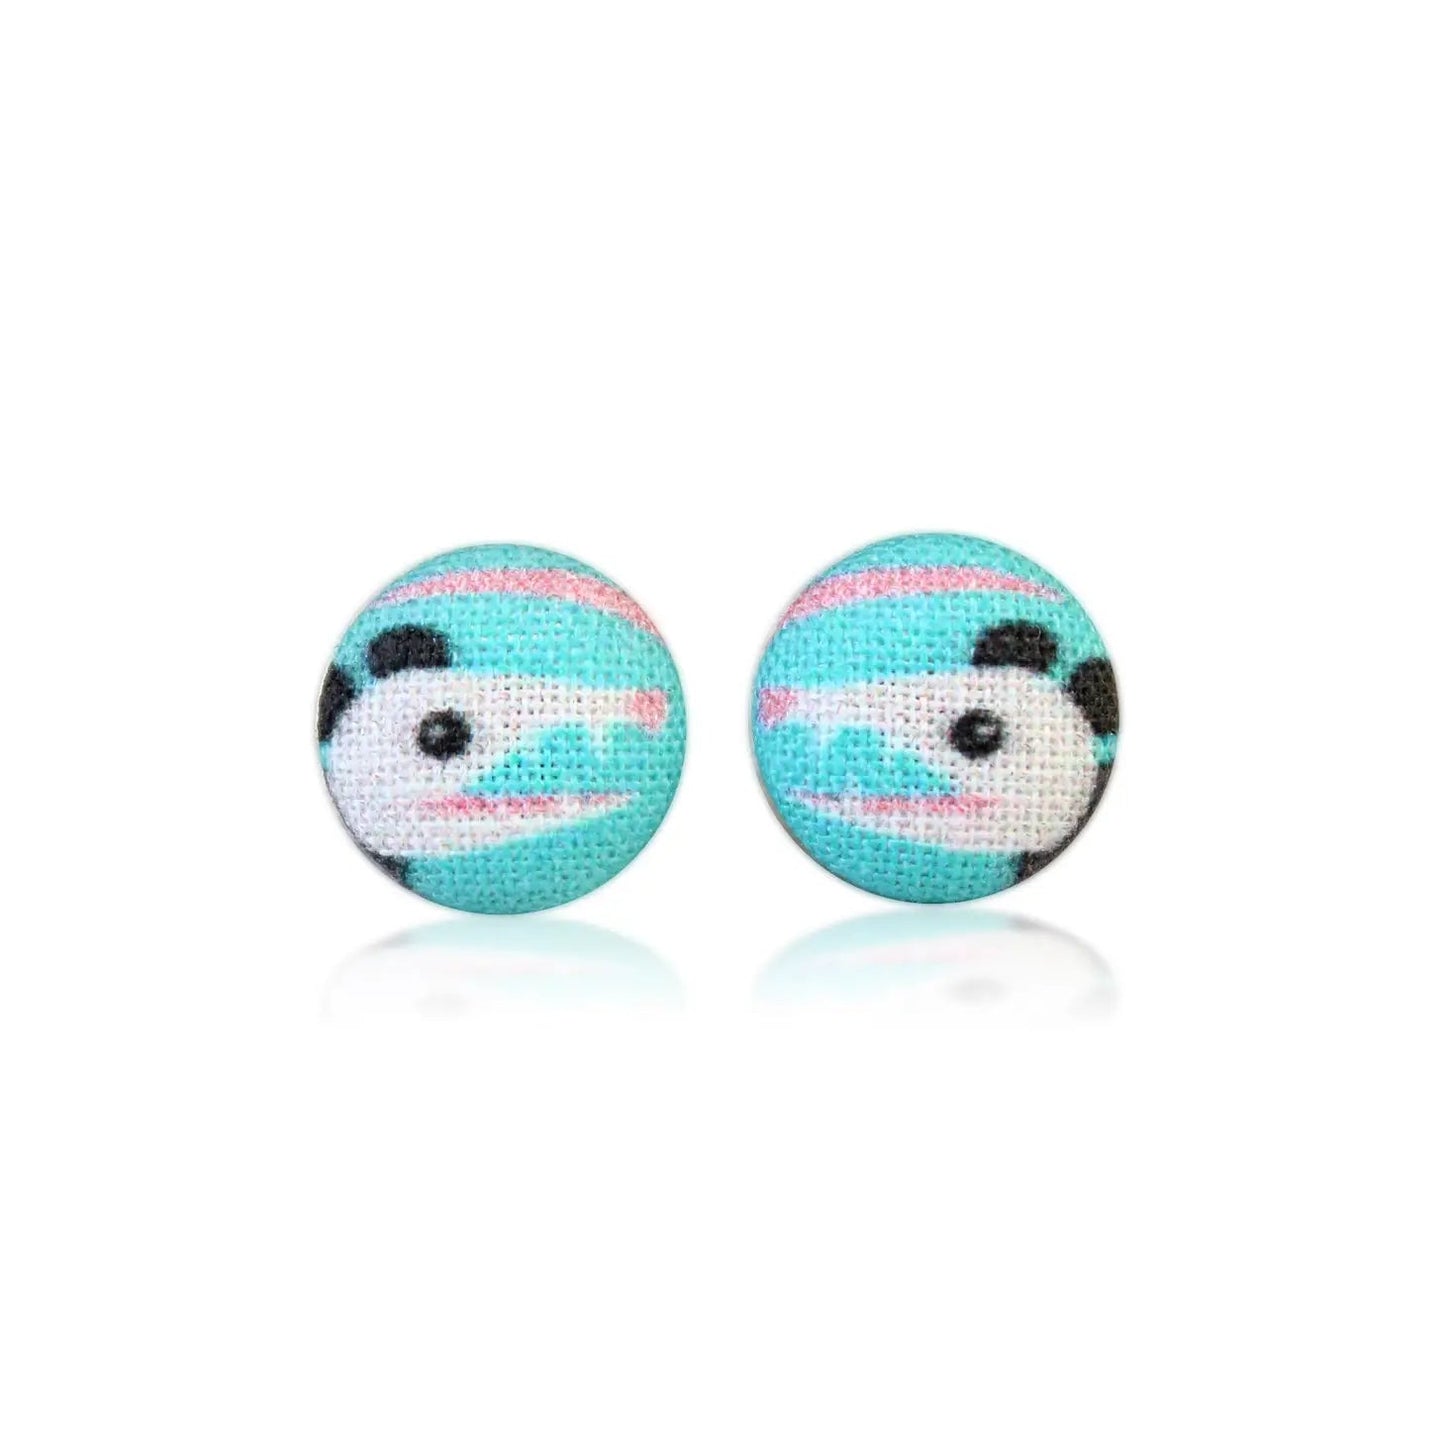 Possum Fabric Button Earrings | Handmade in the US